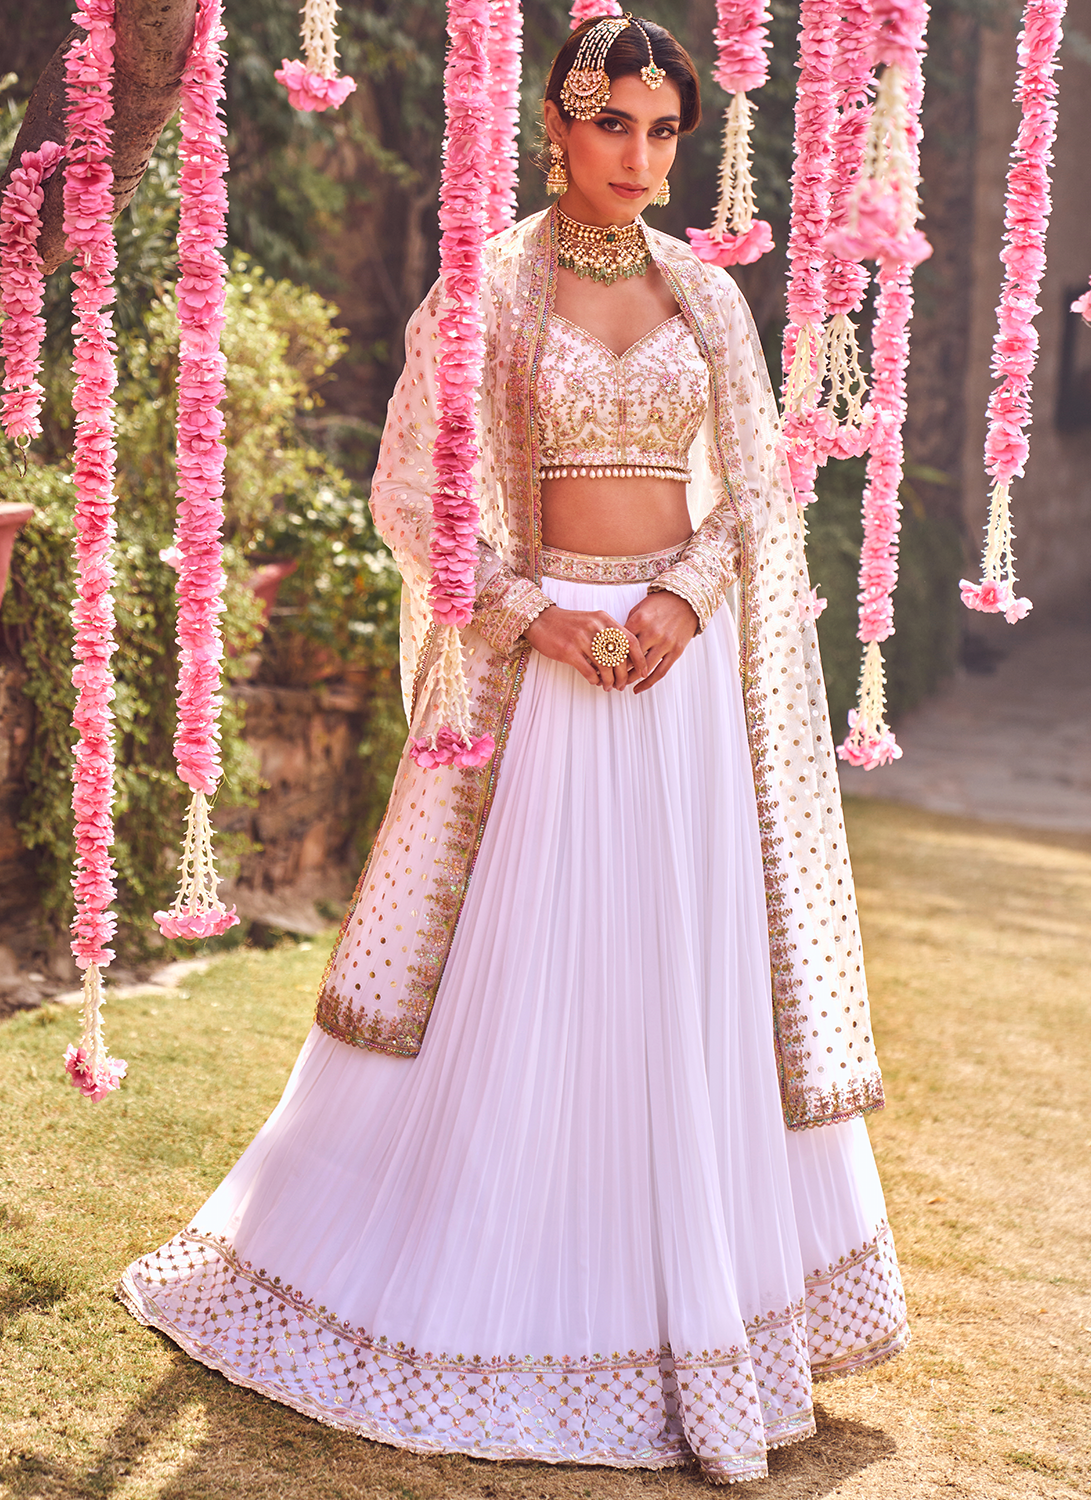 White and Gold Embroidered Lehenga